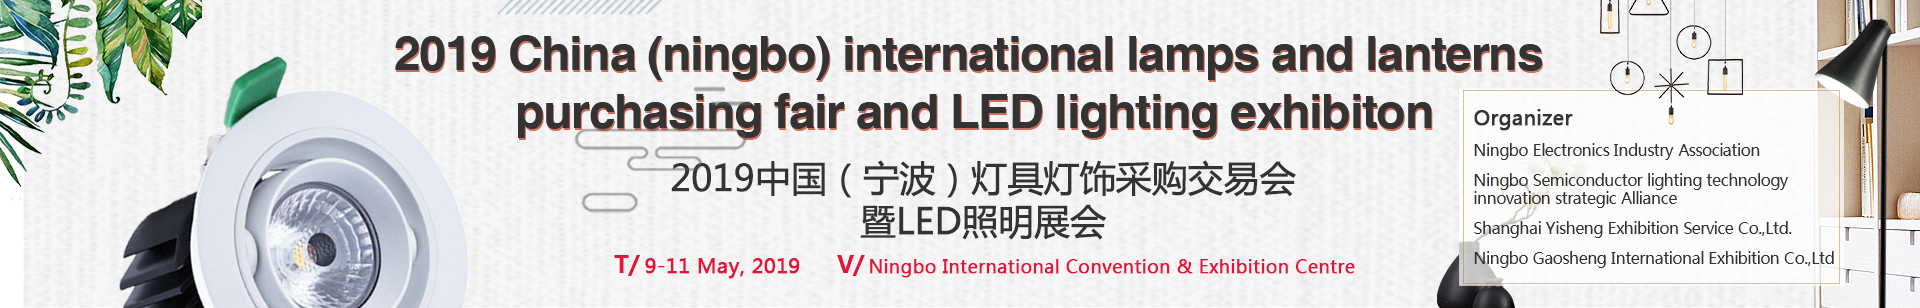 Int'l lamps and lanterns purchasing fair & LED lighting exhibiton